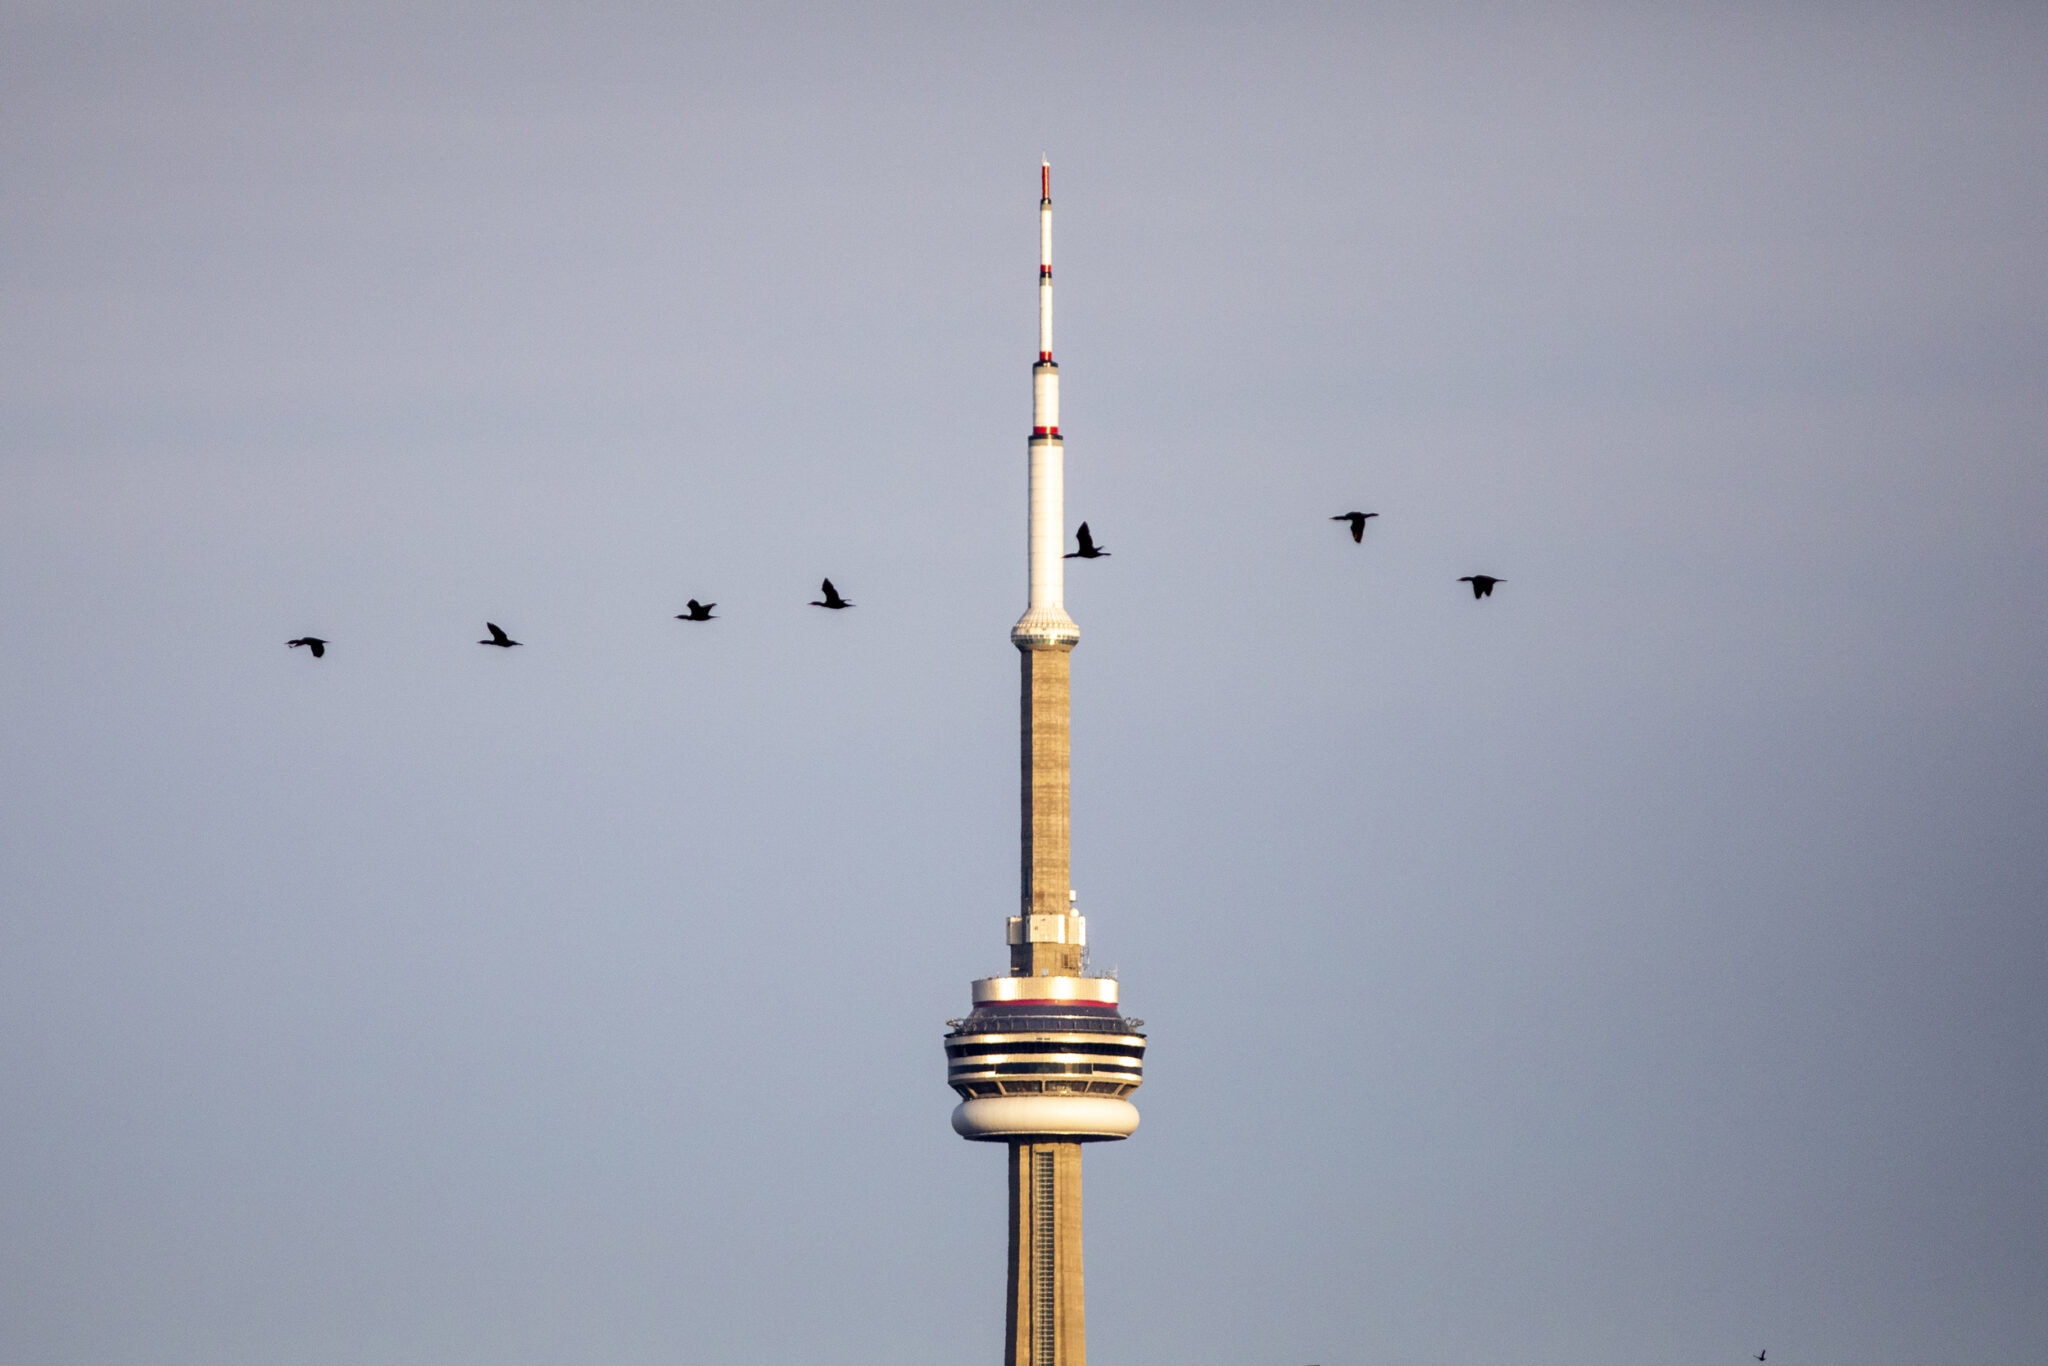 Birds flying past CN tower as seen from Tommy Thompson Park